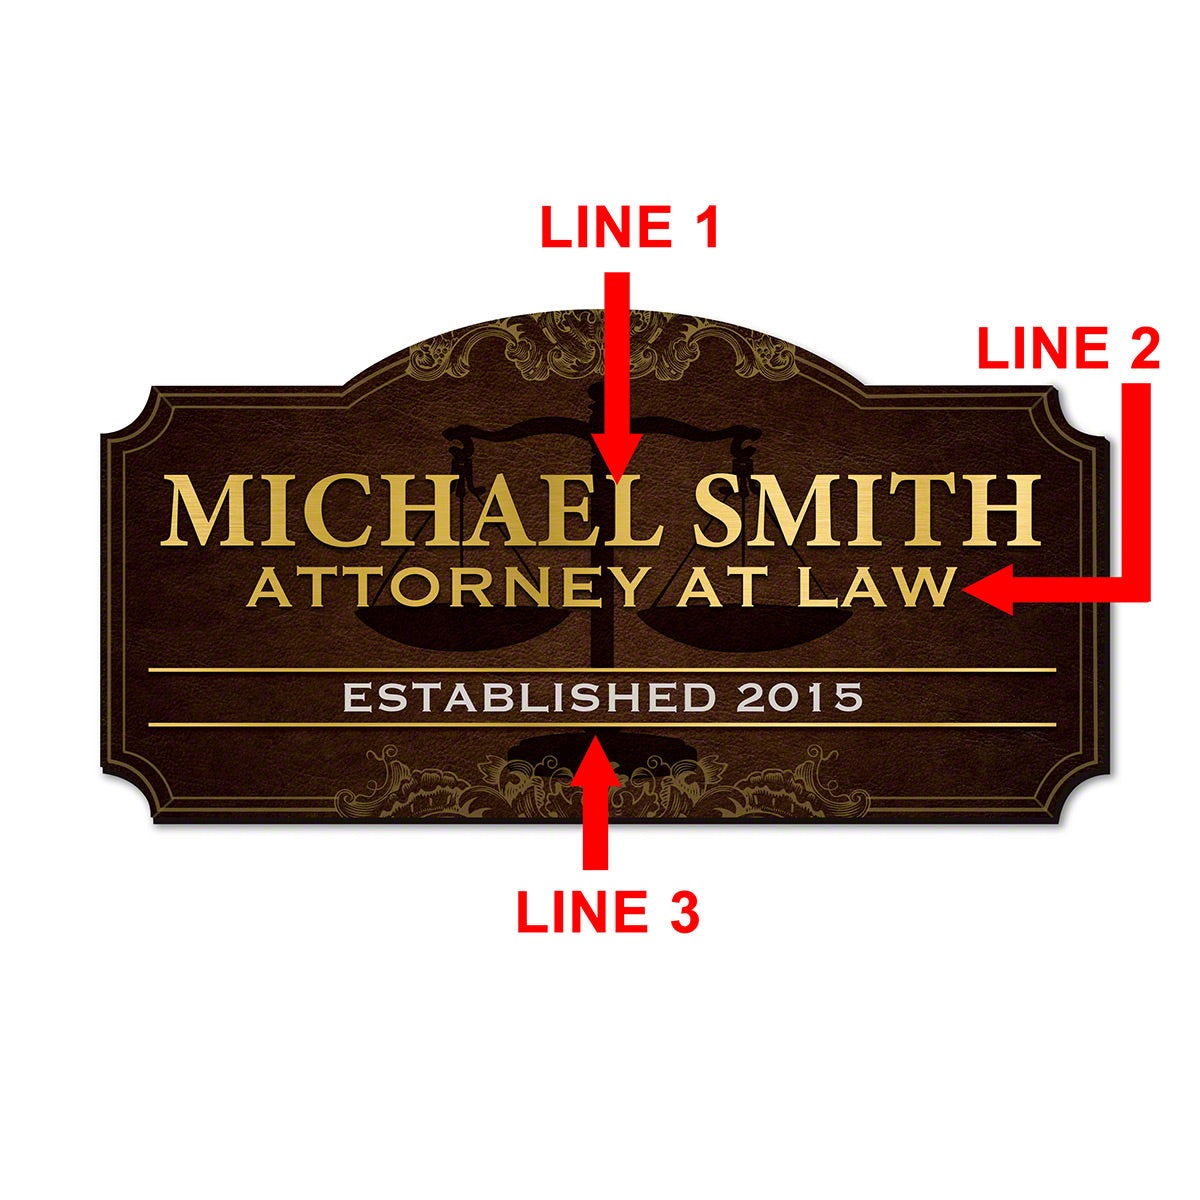 Advocate of Justice Personalized Wood Sign Gift for Attorney